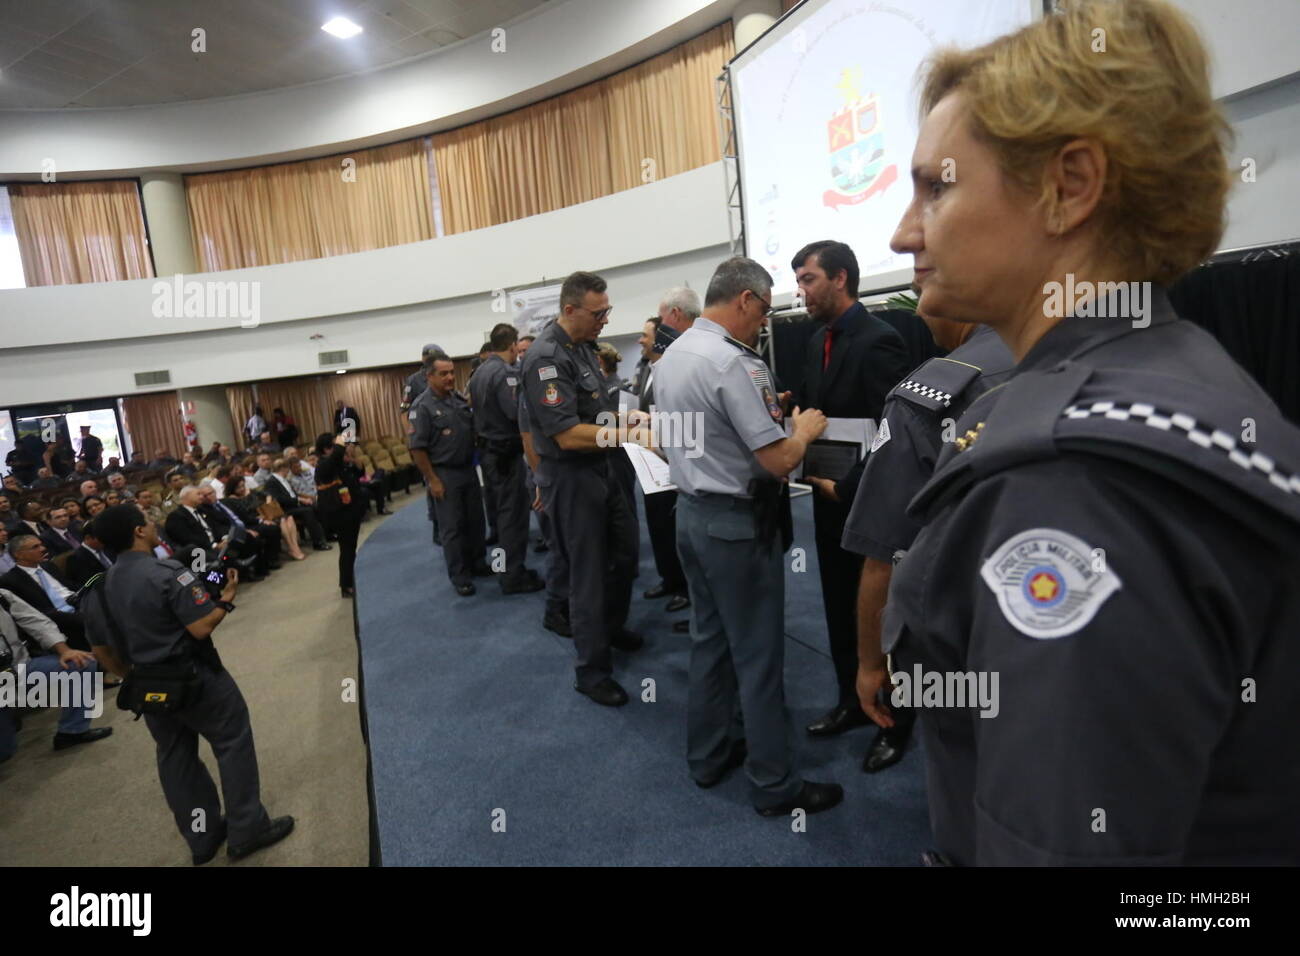 SÃO JOSÉ DOS CAMPOS, SP - 03.02.2017: SOLENIDADE COMANDO DE POLICIAMENTO CPI - Colonel Eliane Nikoluk Sachetti during the ceremony commemorating the 41st anniversary of the creation of the police command of the Interior 1, in the Technological Park in São José dos Campos (SP), said on Friday (3). During the ceremony, Colonel Eliane Nikoluk Sachetti has an accountability to the community as the new trigger Operation Iron Fist in 39 cities in the metropolitan region of the Paraíba Valley and North Coast. (Photo: Luis Lima Jr/Fotoarena) Stock Photo